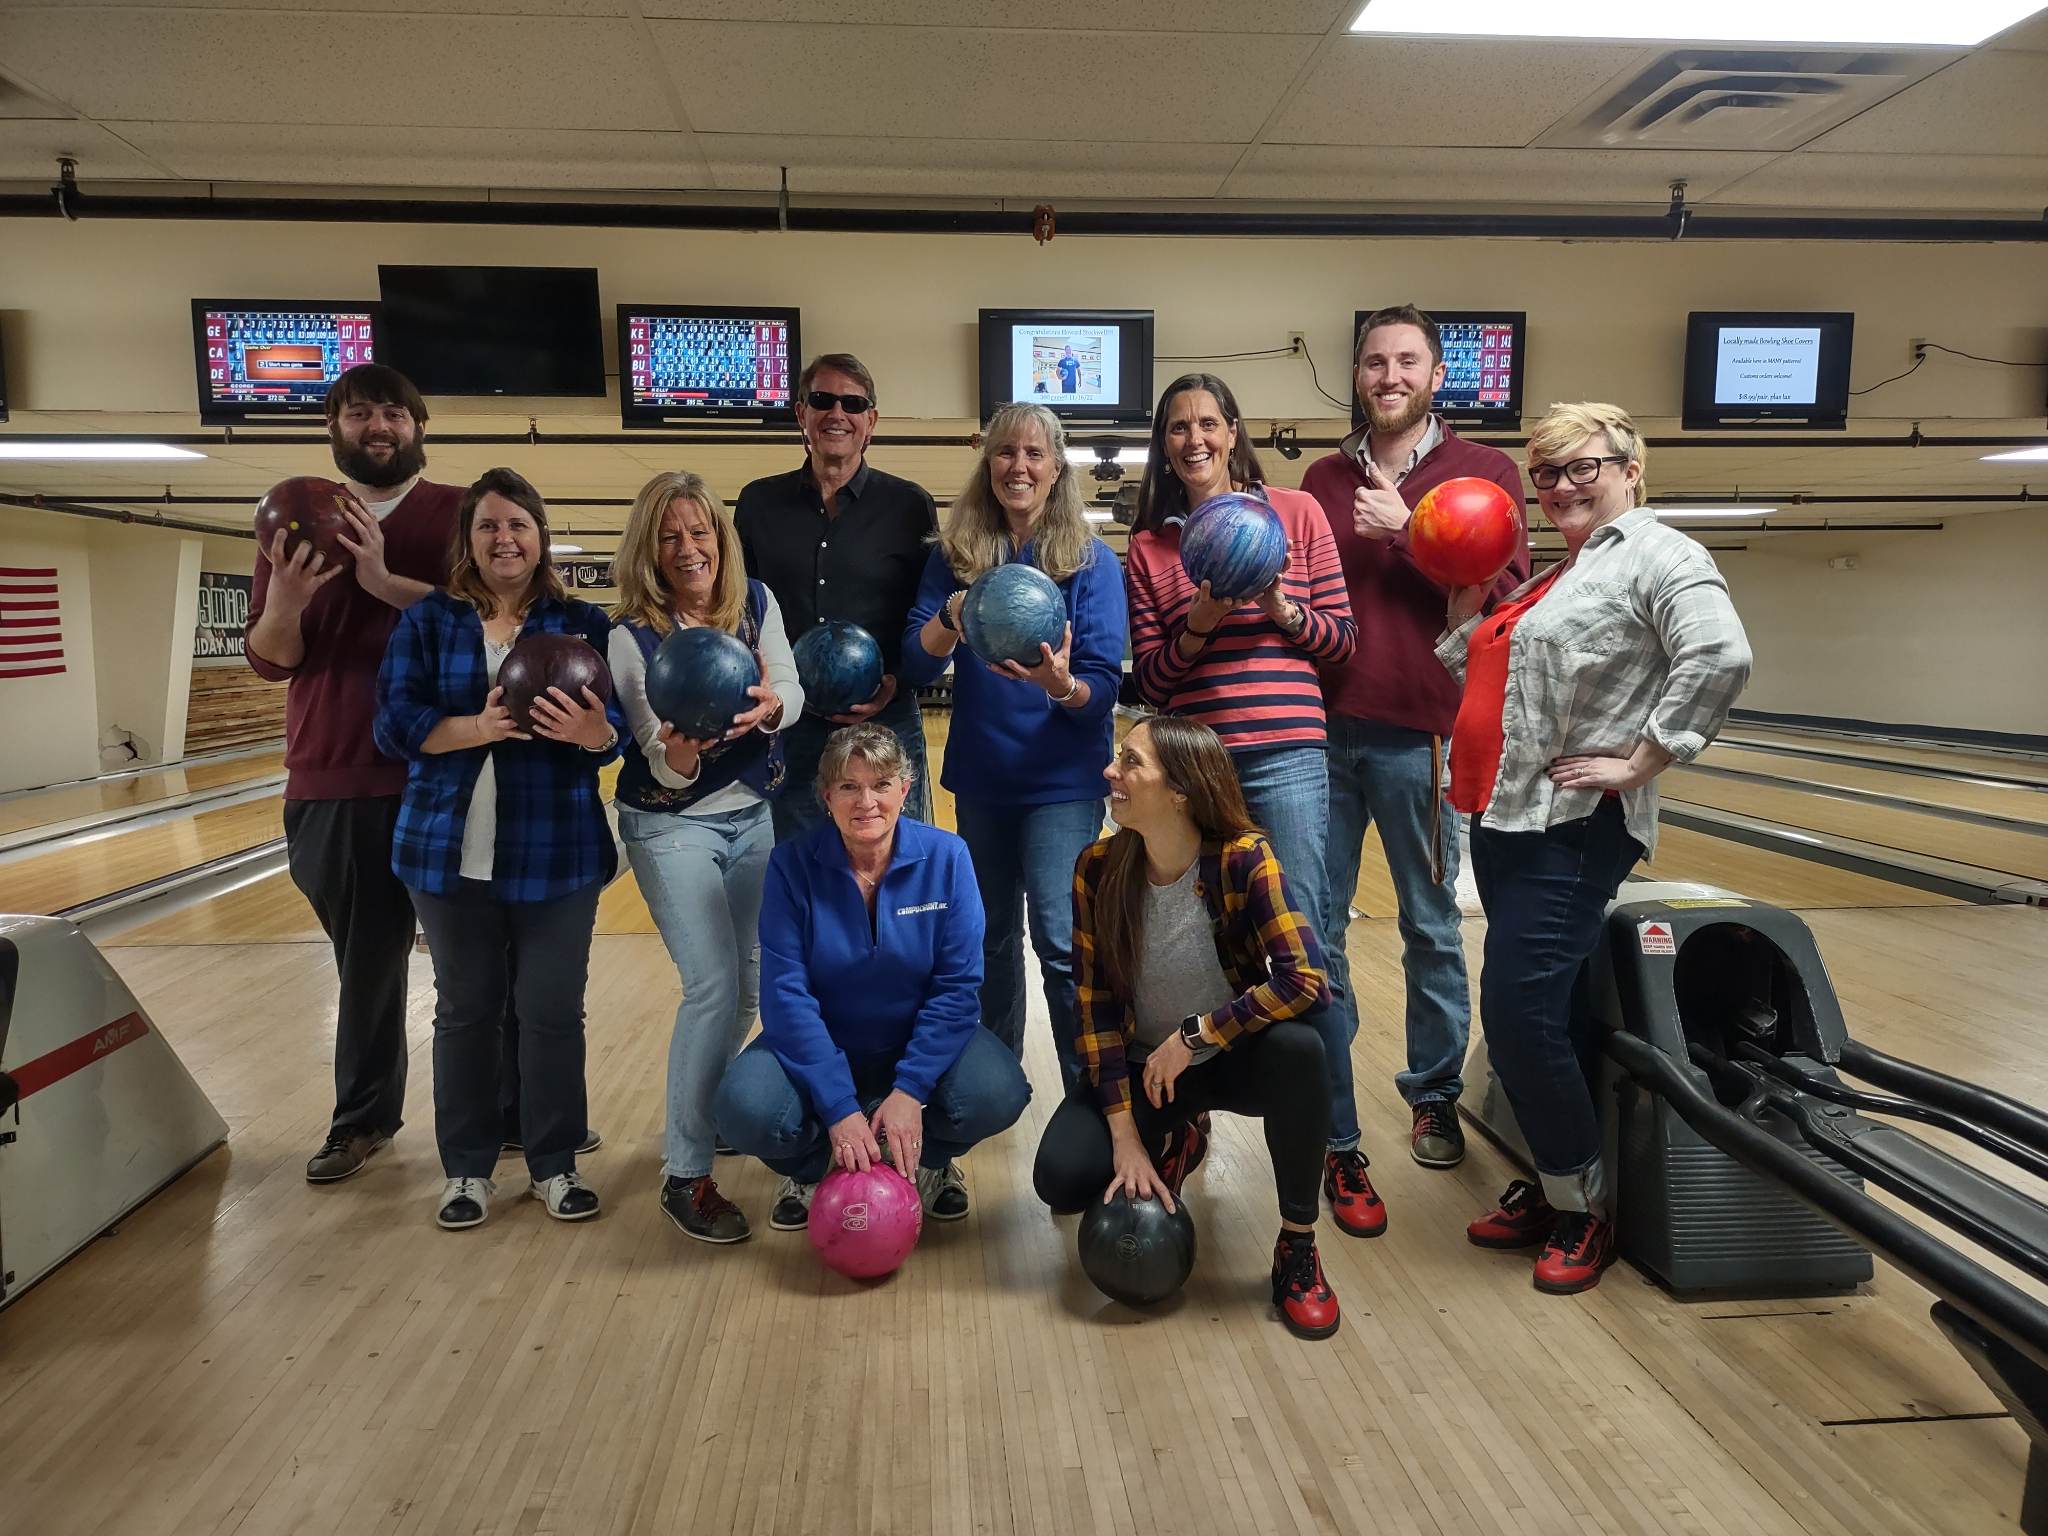 10 Reasons to Plan a Family Bowling Trip This Weekend